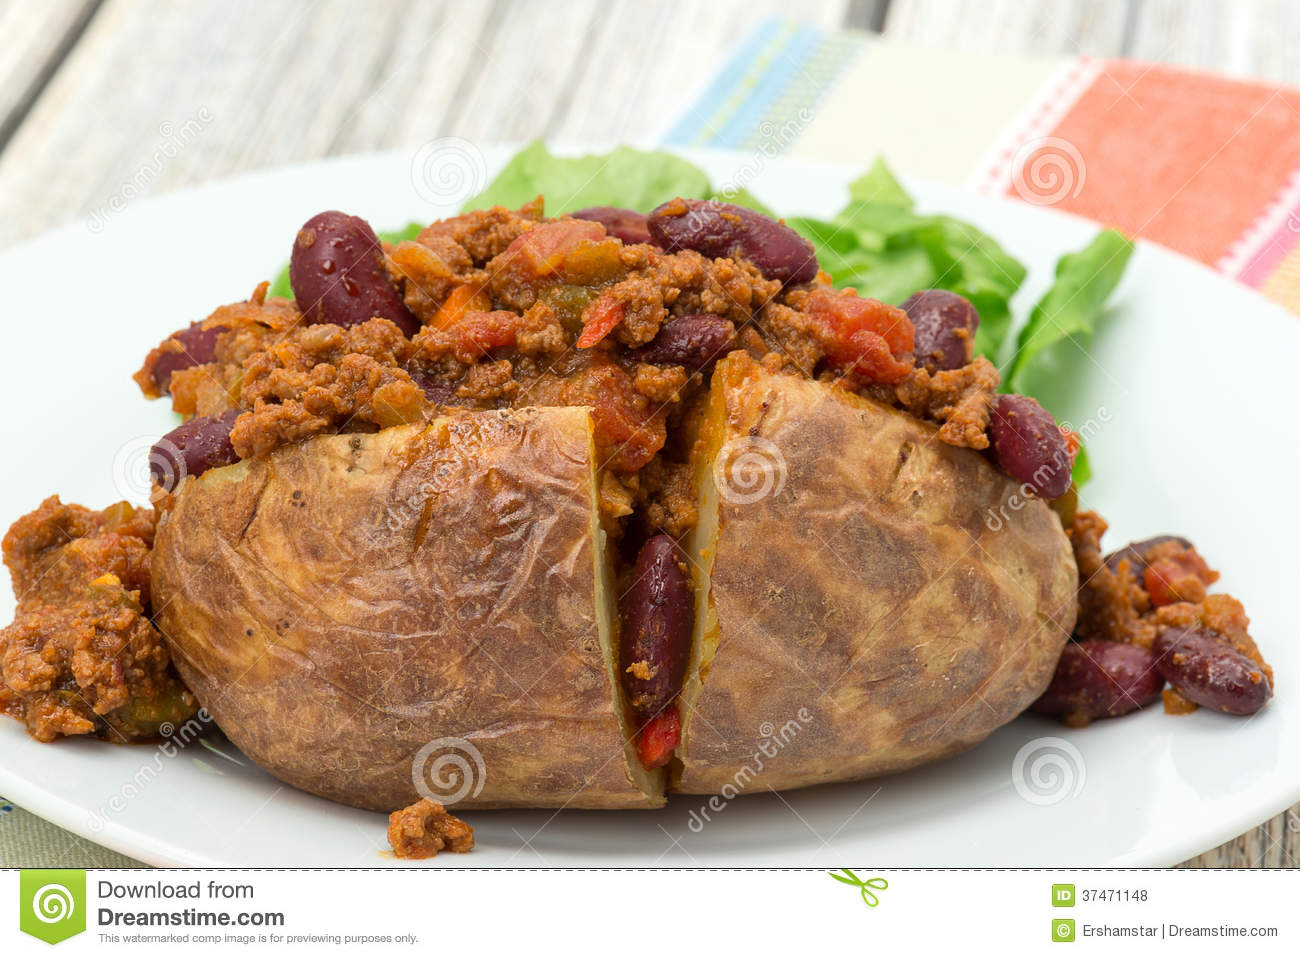 Baked Potato Filled With Spicy Chili Con Carne   Studio Shot 